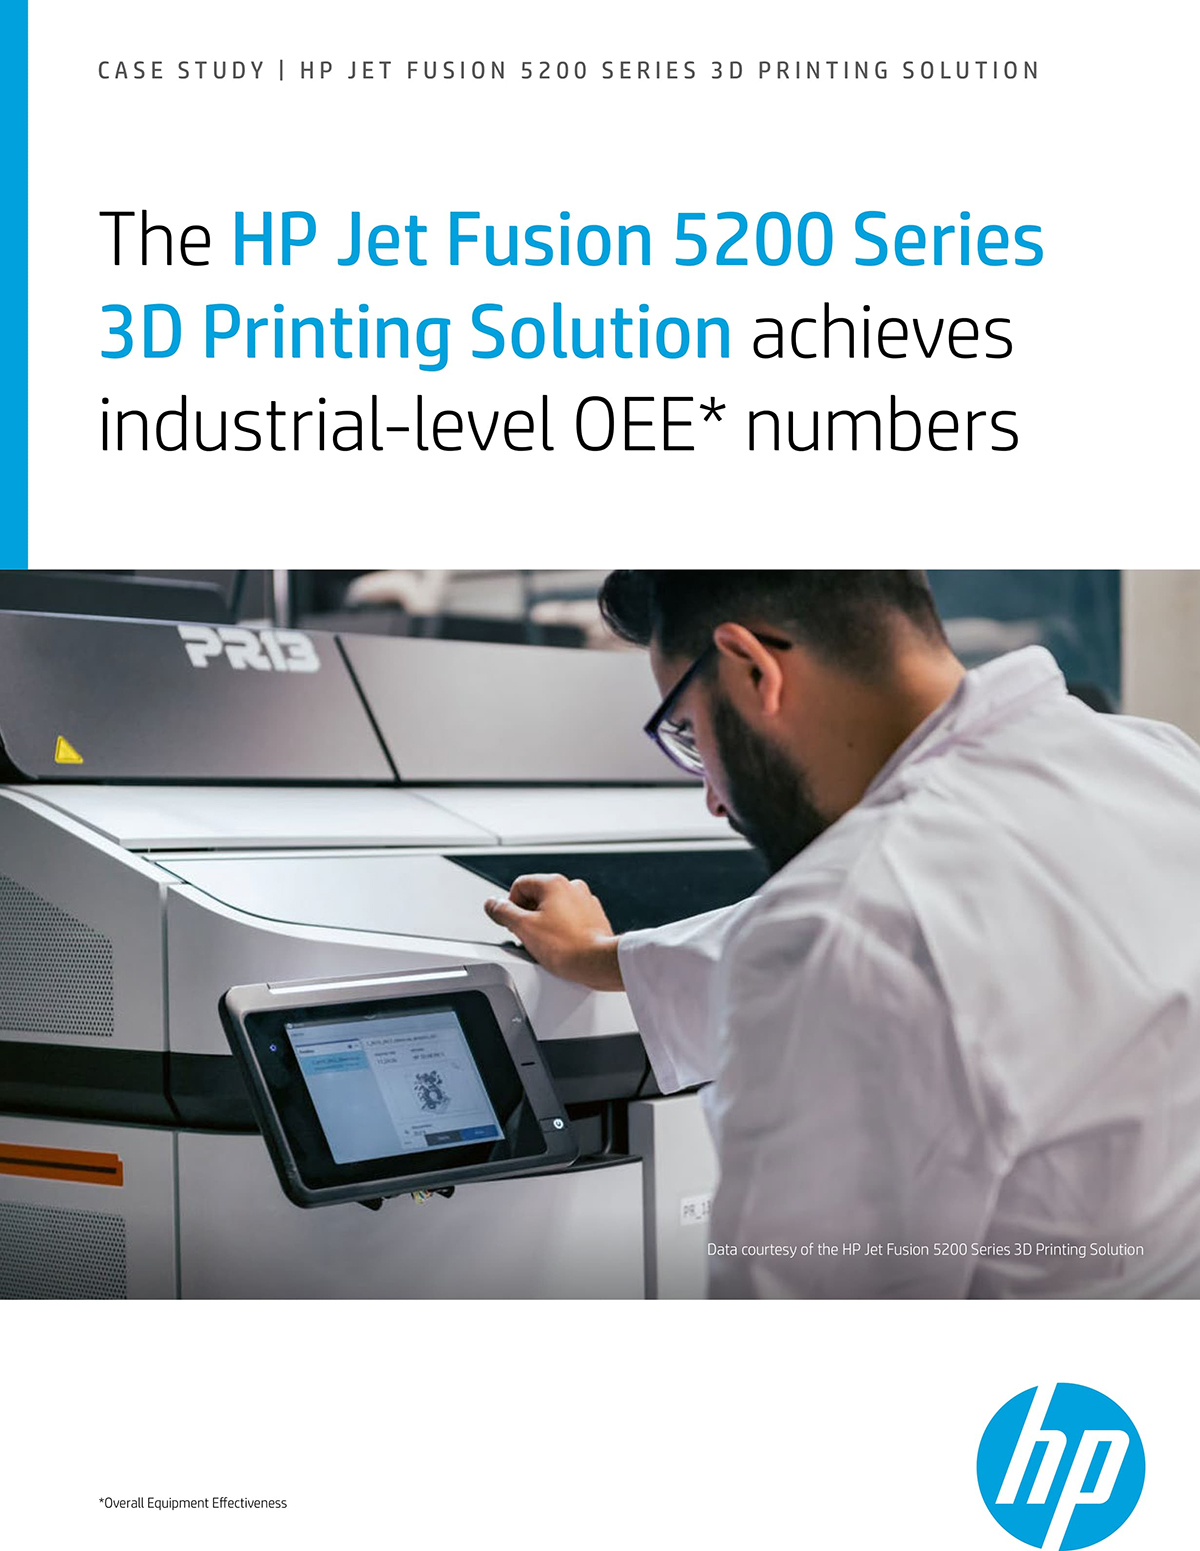 The HP Jet Fusion 5200 Series 3D Printing Solution achieves industrial-level OEE* numbers